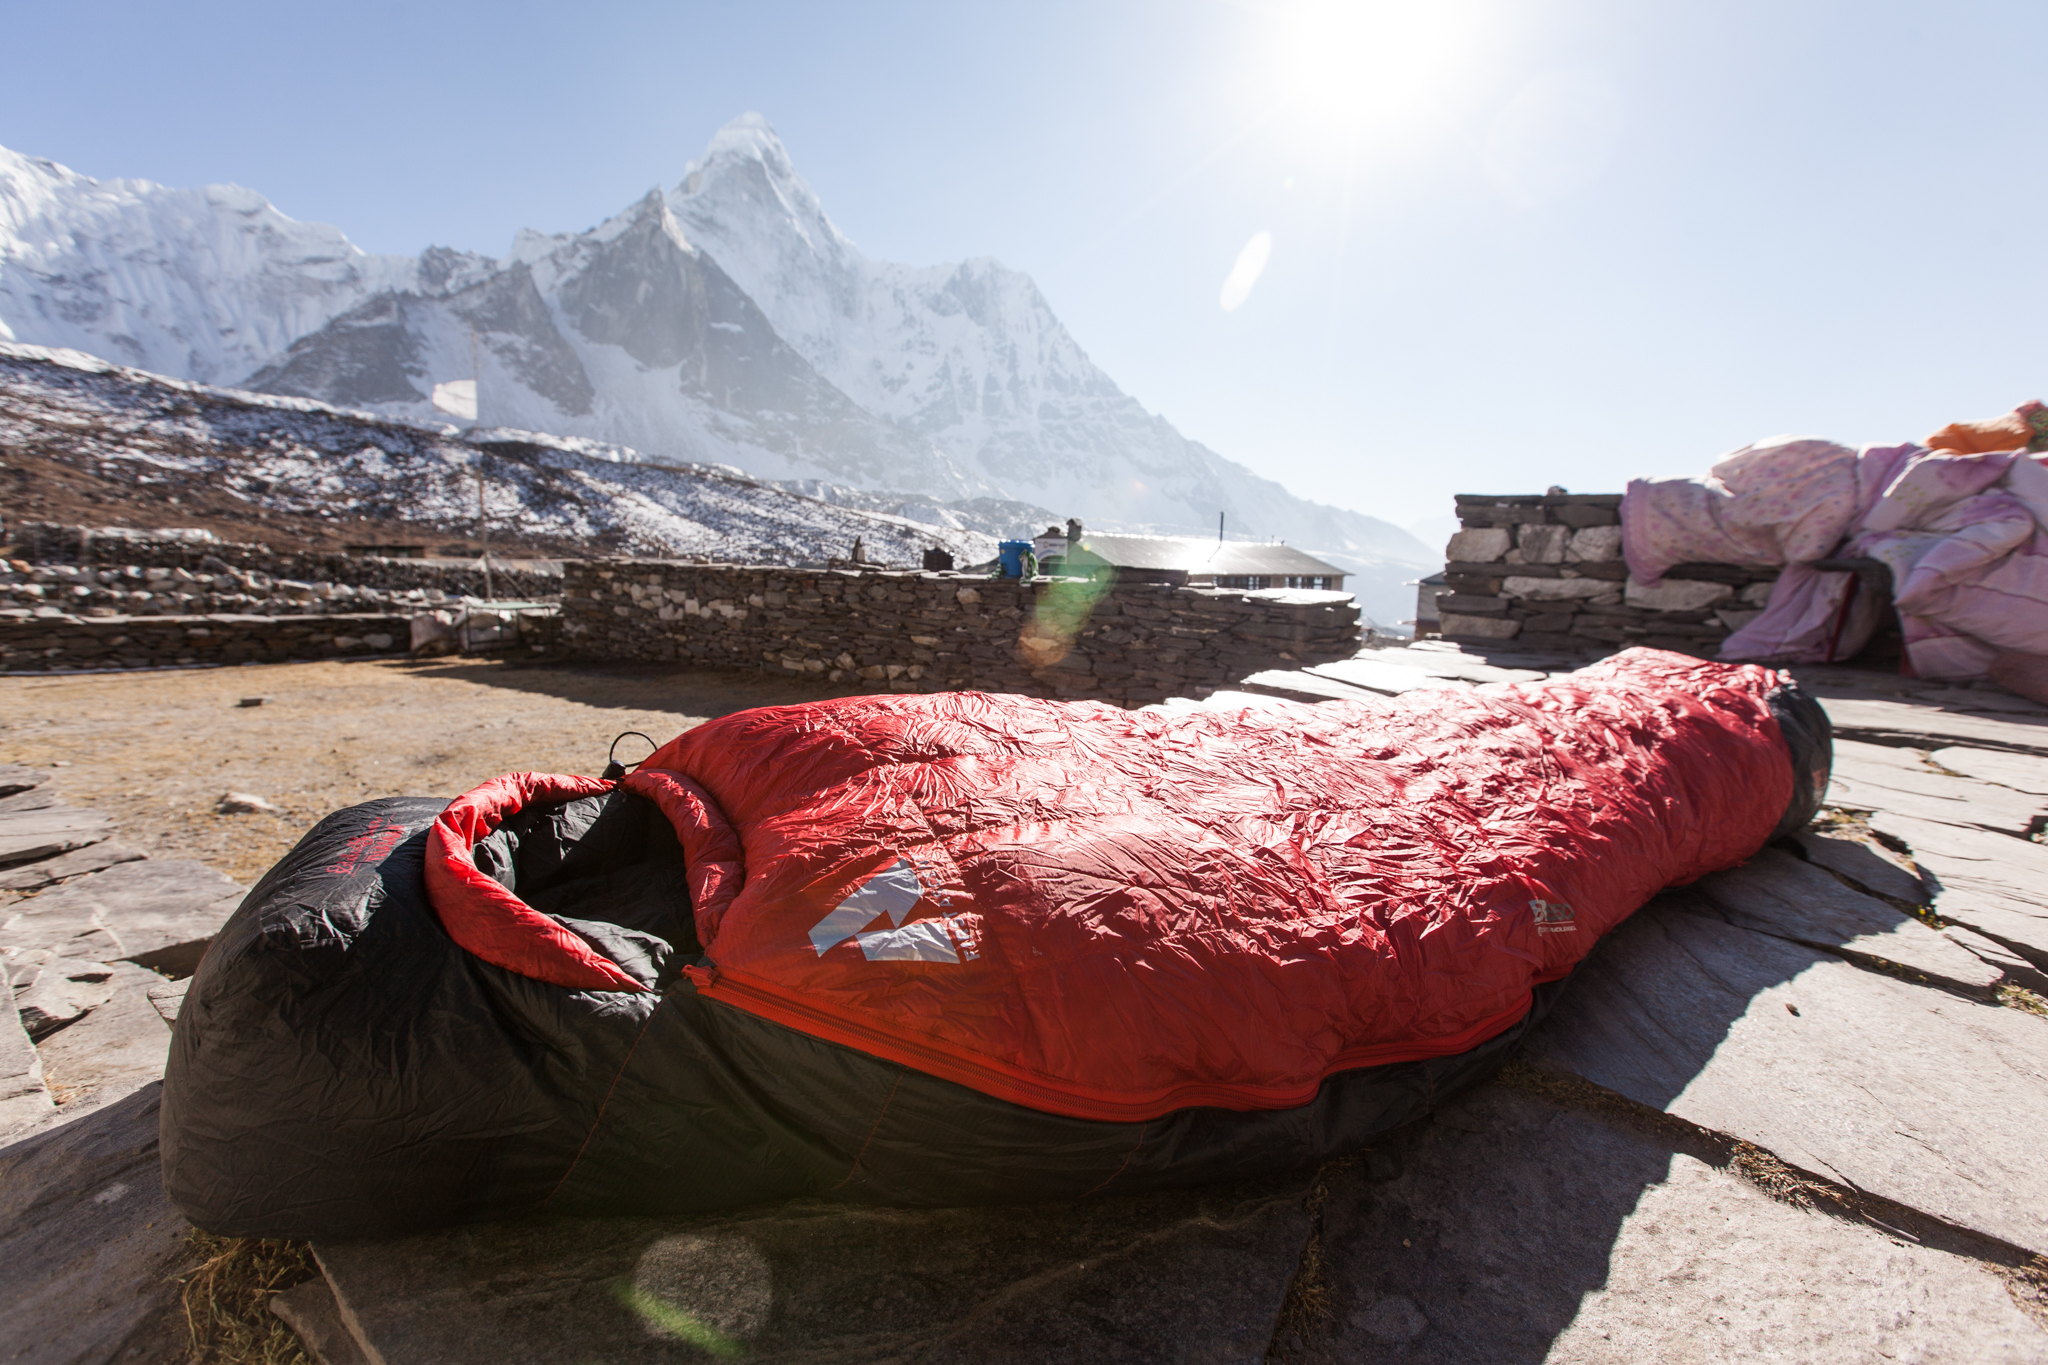 What It Feels Like To Crawl Into A -34°C Sleeping Bag In The Himalayas